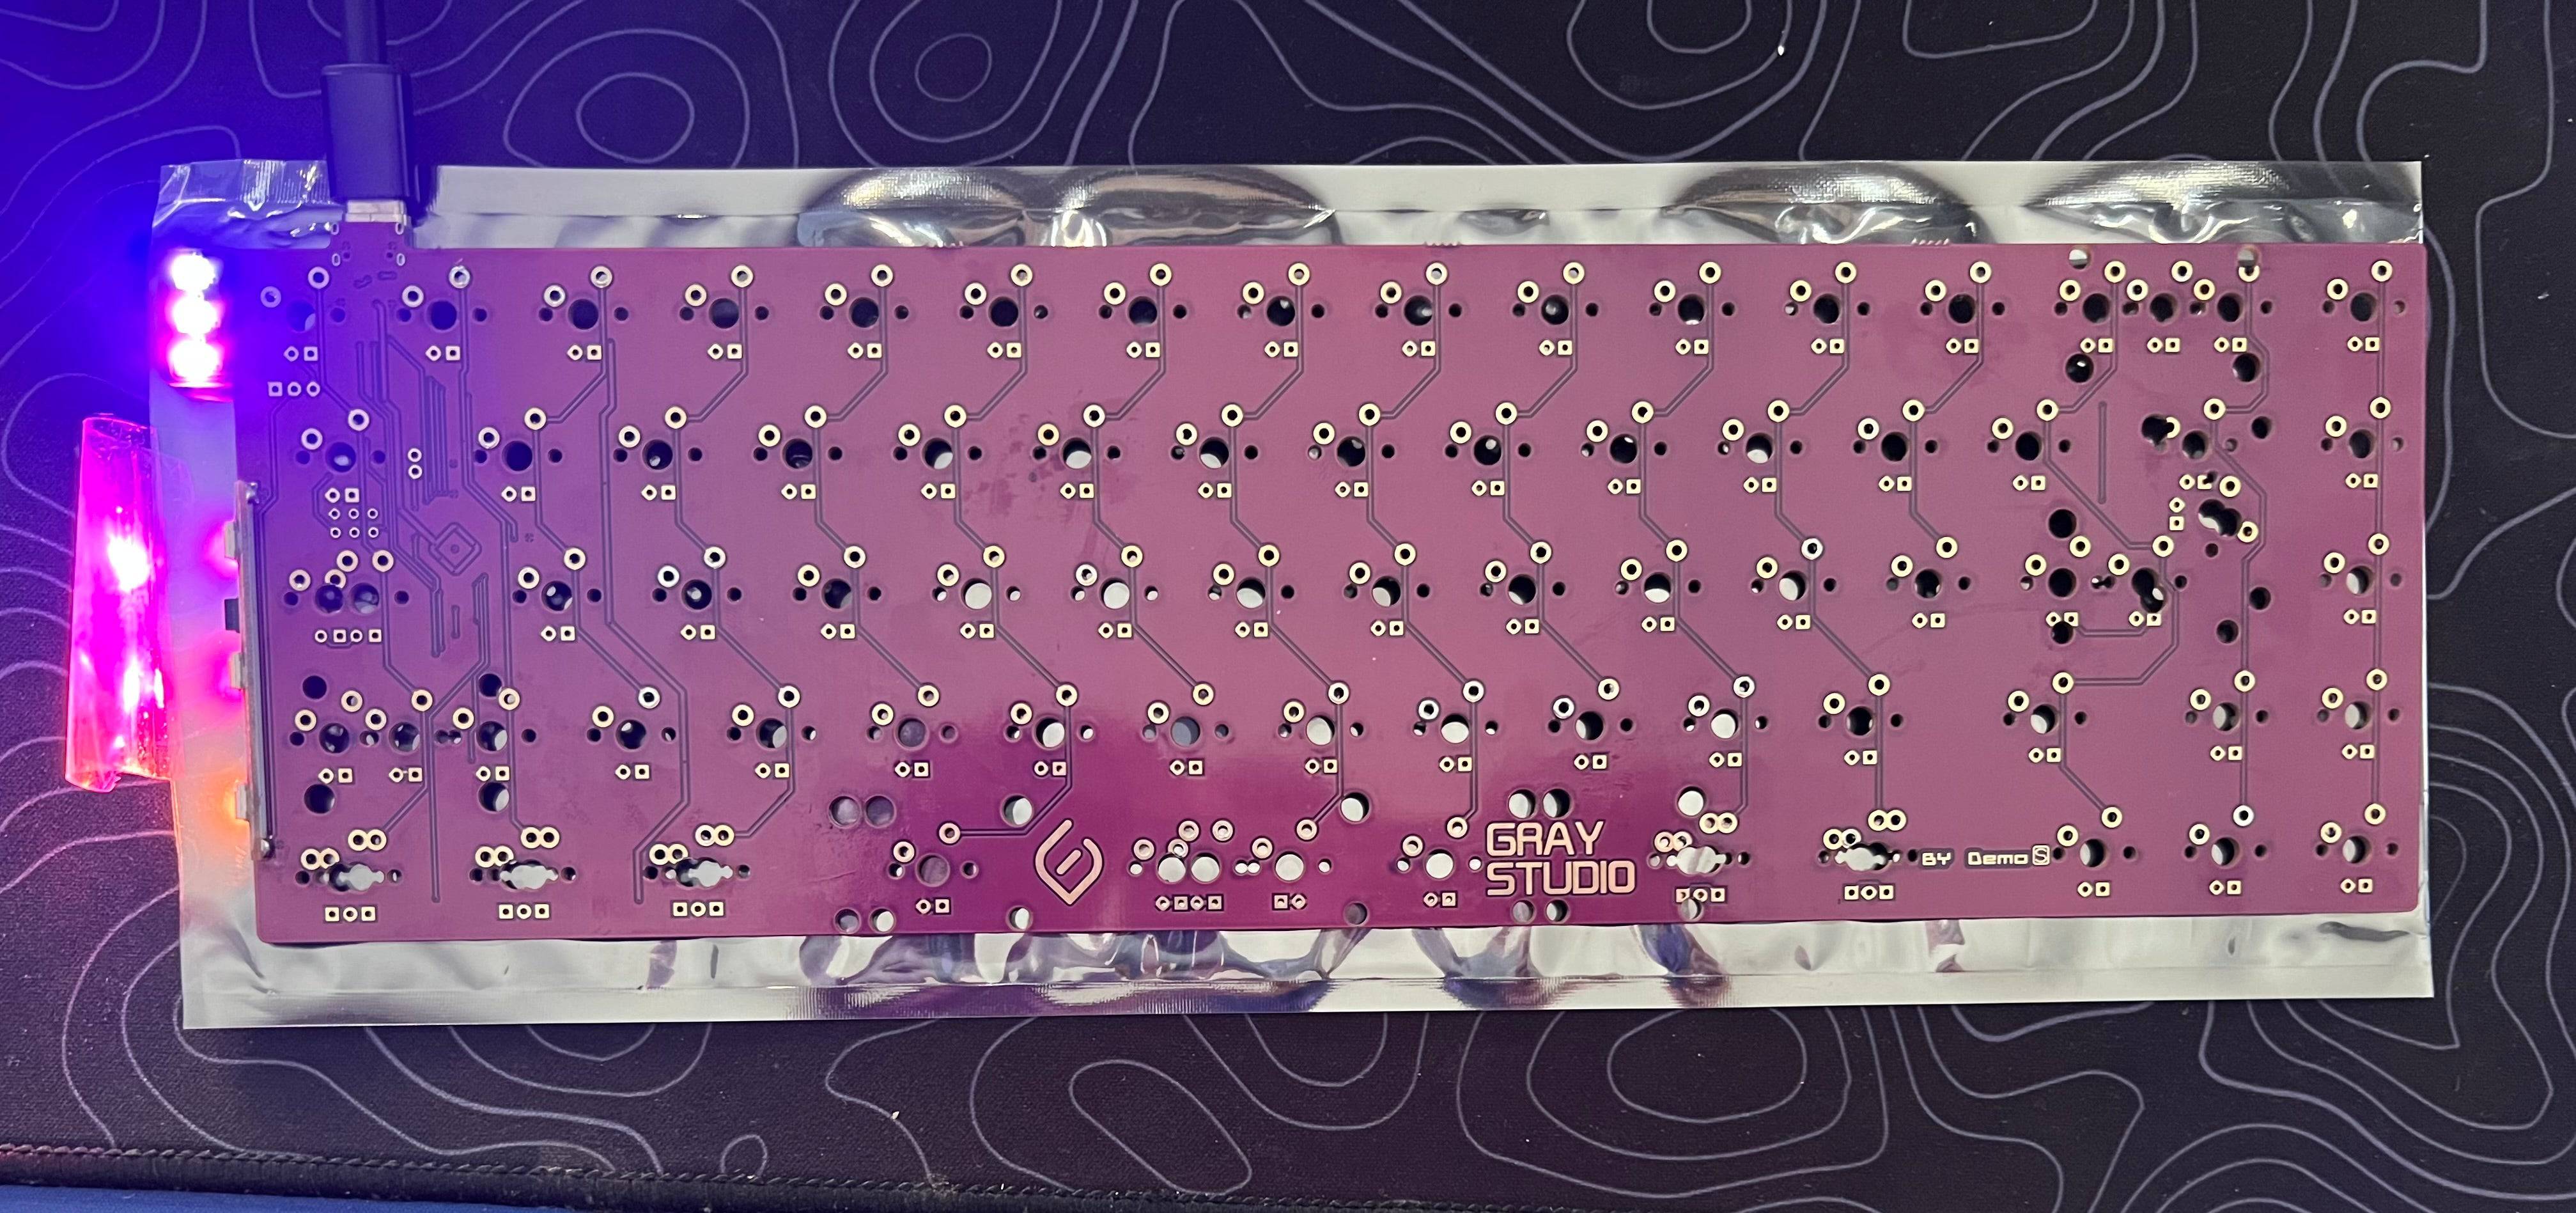 [KFA MARKETPLACE] Space65 R2 Solder PCB - KeebsForAll